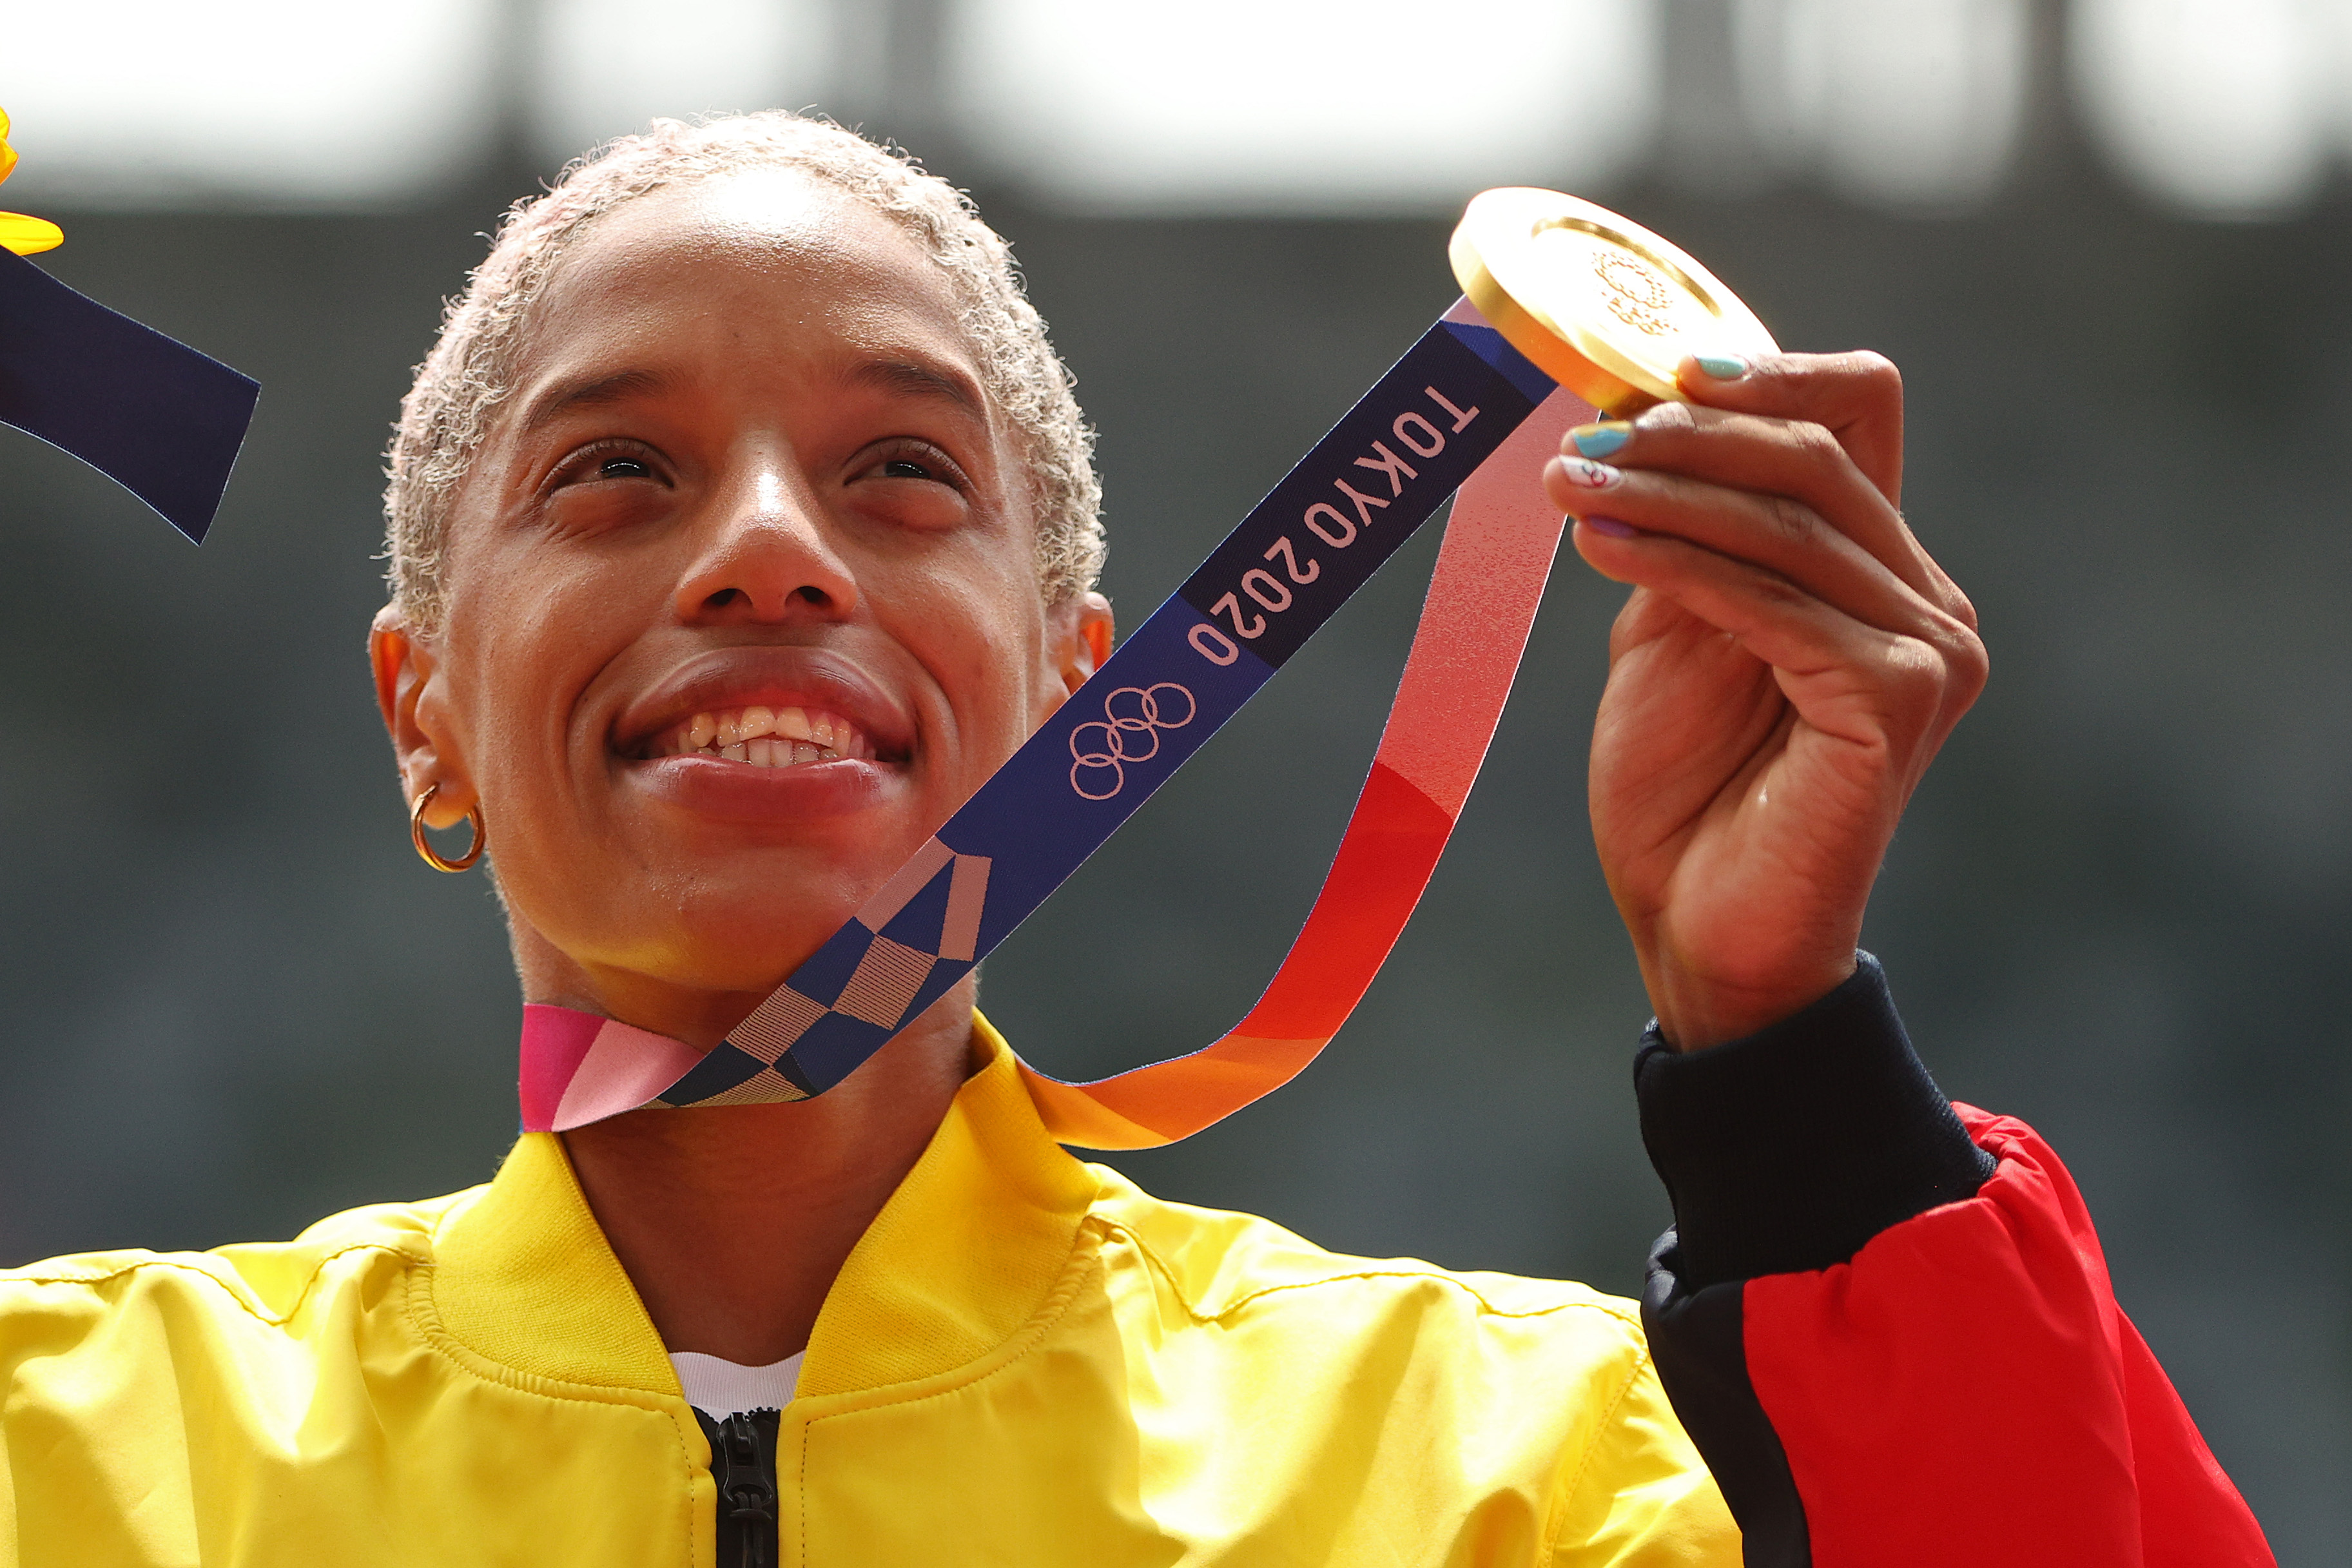 TOKYO, JAPAN - AUGUST 02: Gold medalist Yulimar Rojas of Team Venezuela poses during the medal ceremony for the Women's Triple Jump on day ten of the Tokyo 2020 Olympic Games at Olympic Stadium on August 02, 2021 in Tokyo, Japan. (Photo by Patrick Smith/Getty Images)